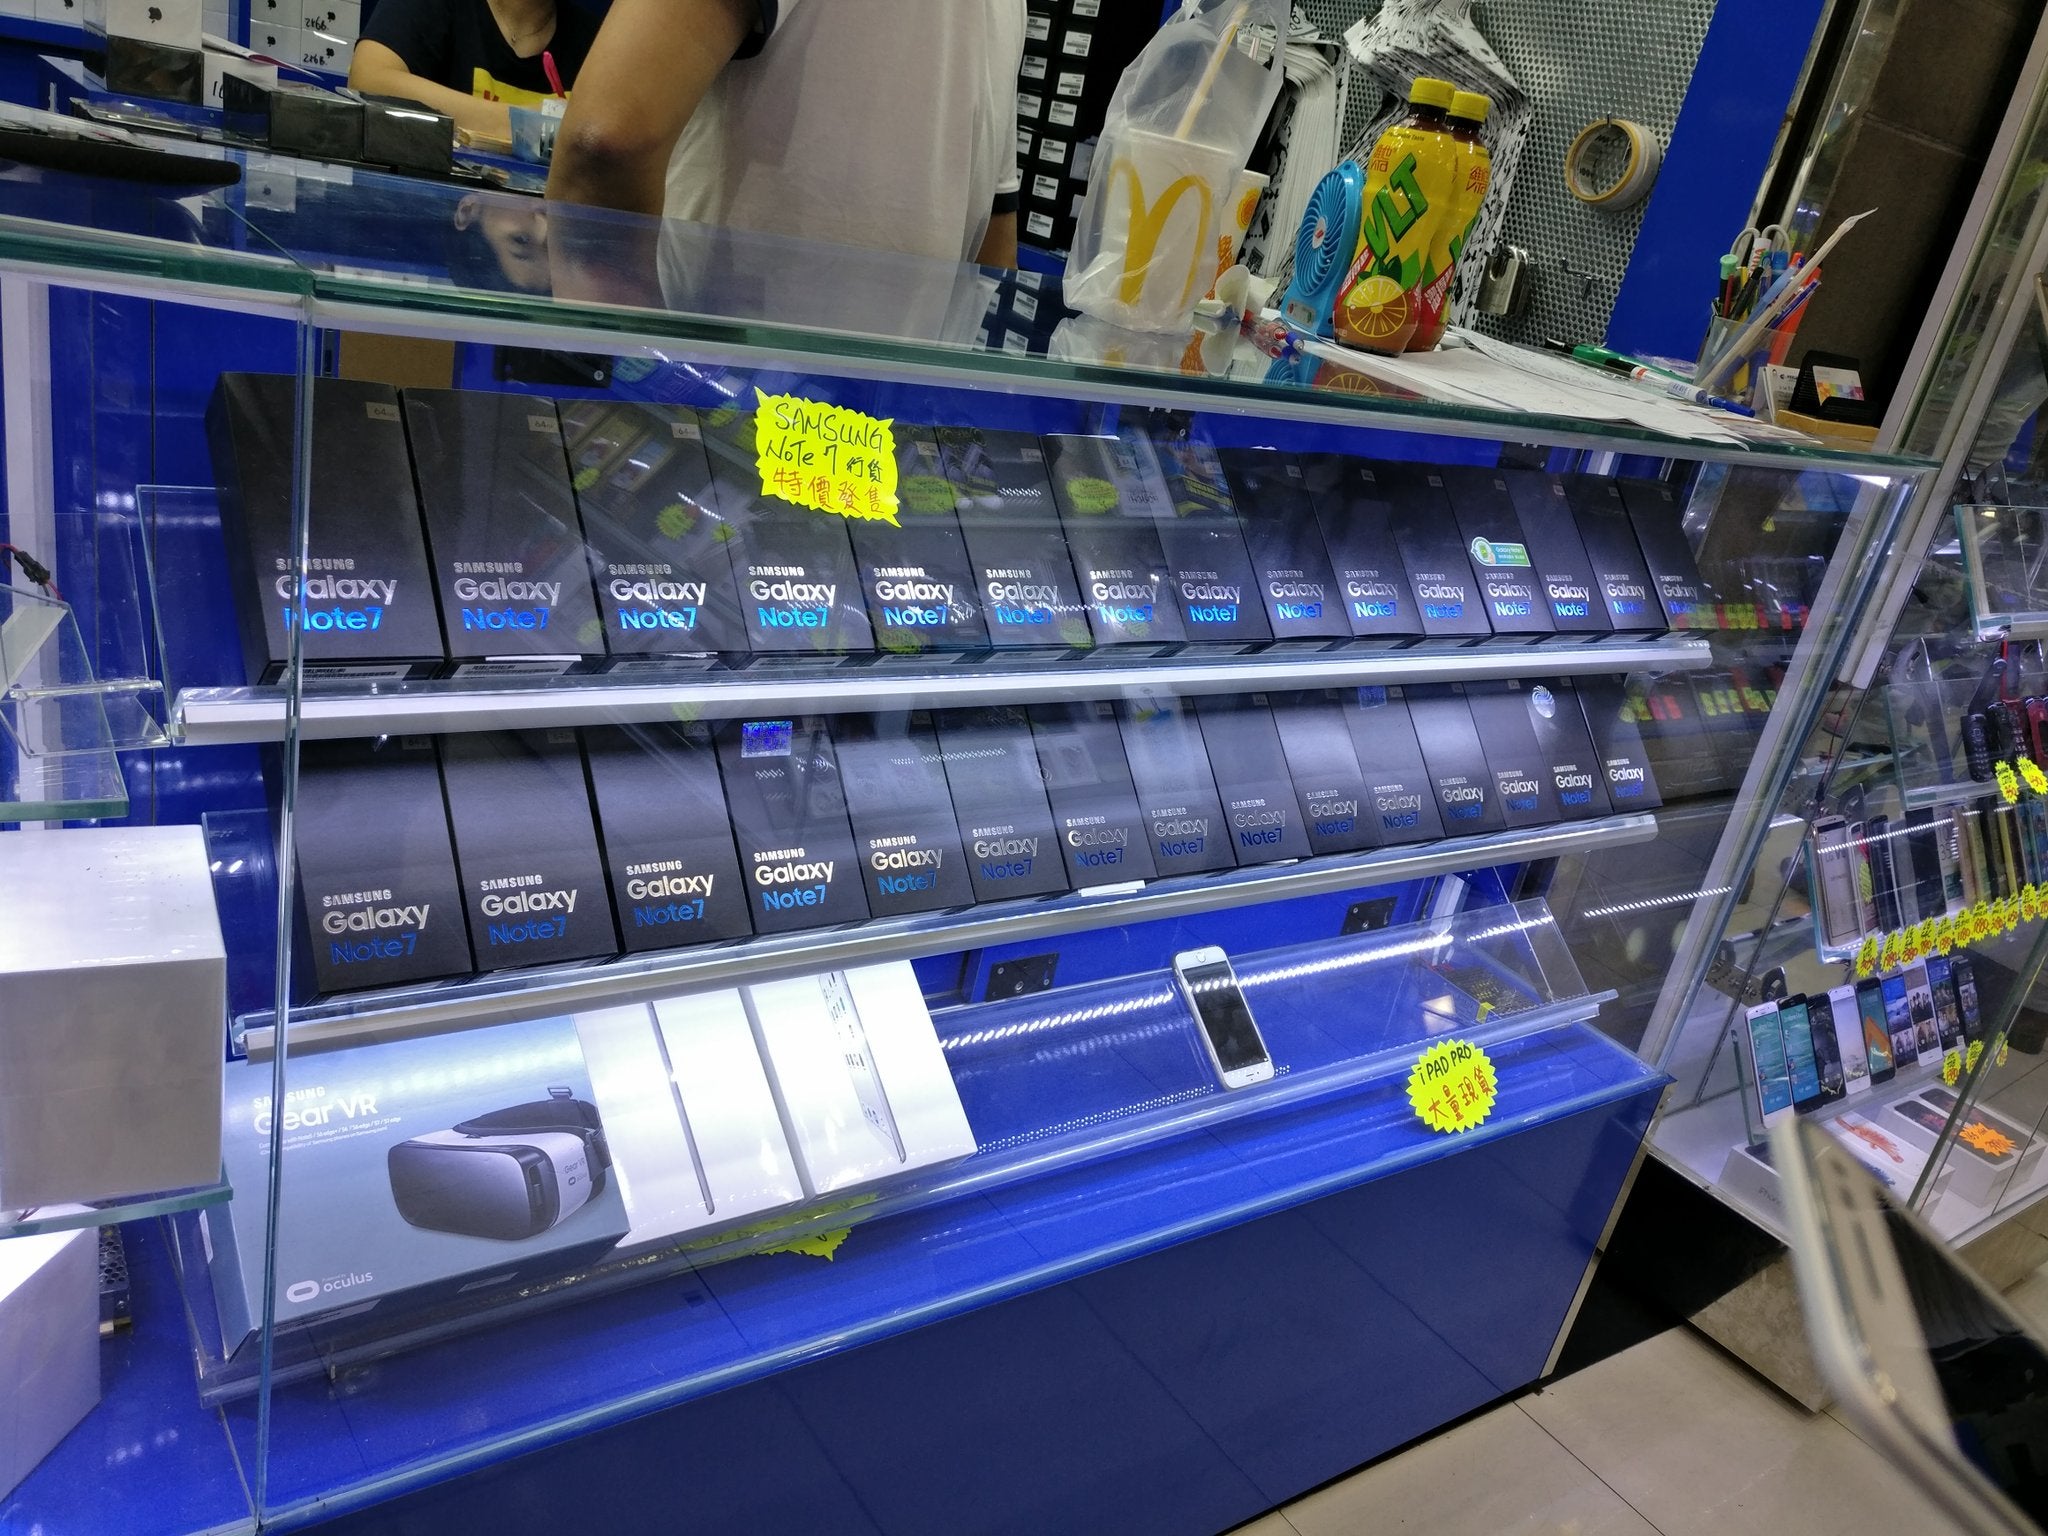 The recalled Samsung Galaxy Note 7 remains on sale at a Hong Kong retailer - Despite the second recall, you can buy the Samsung Galaxy Note 7 in Hong Kong